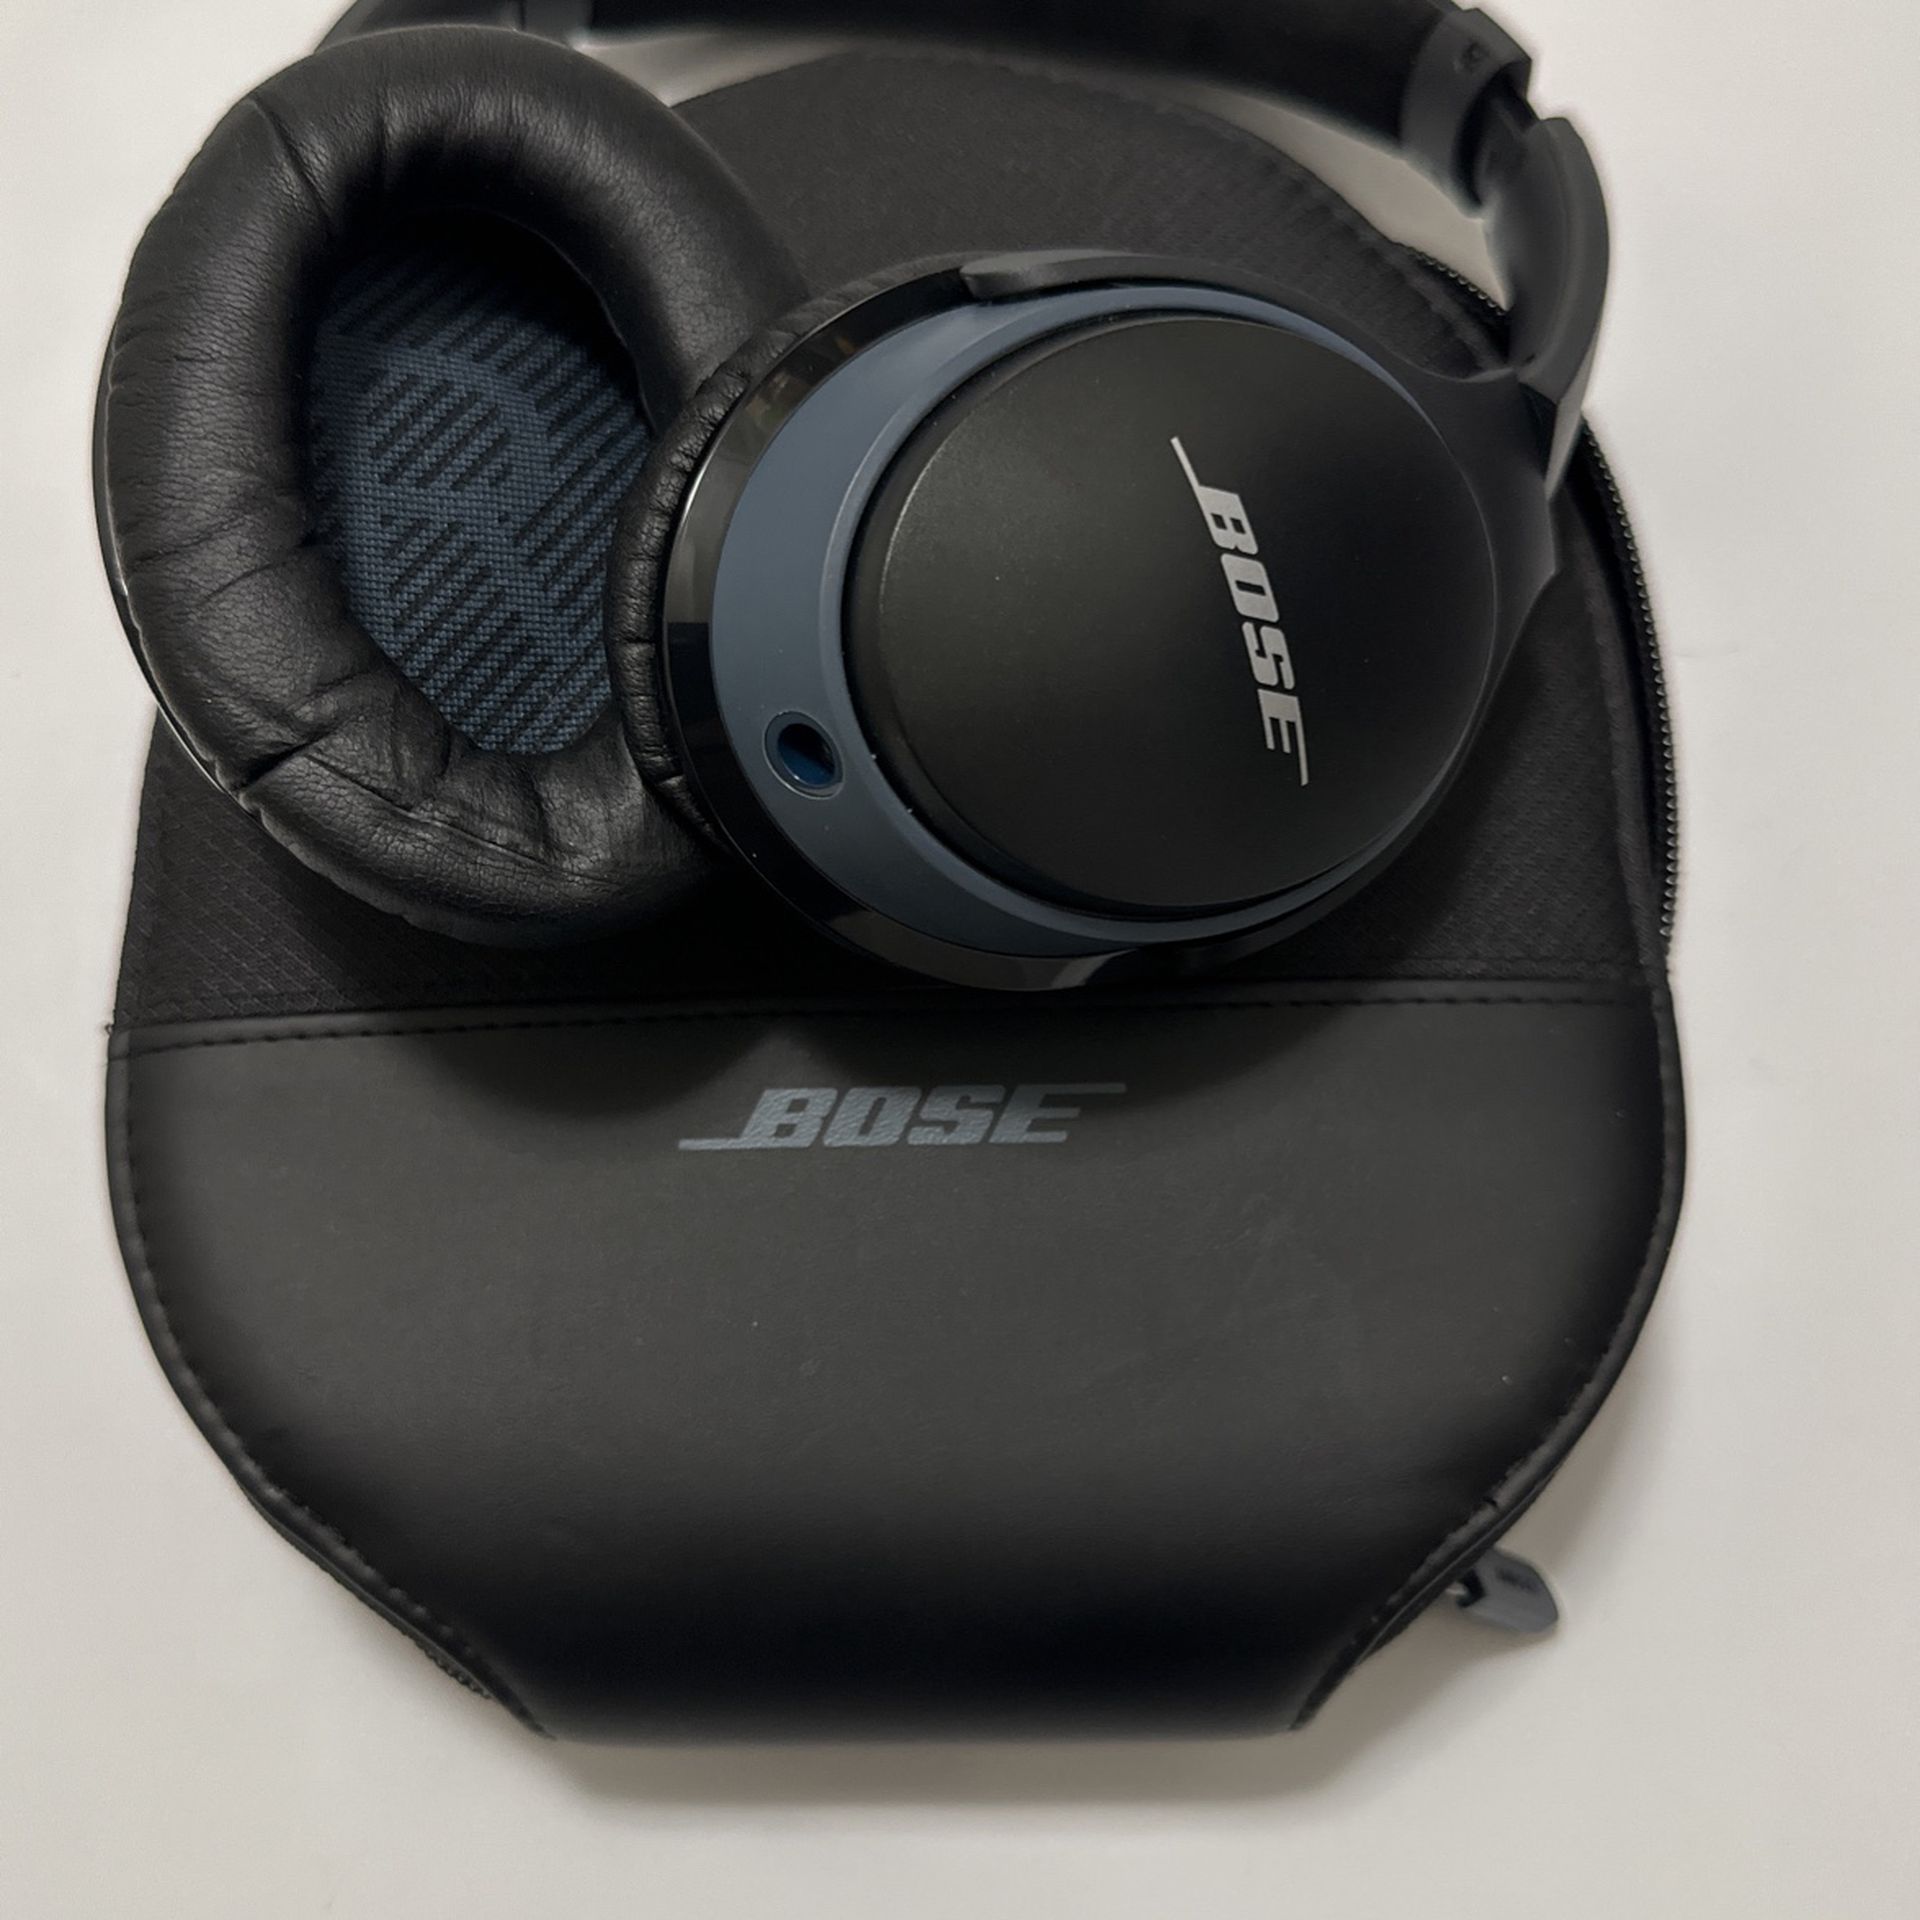 Bose Bluetooth Headphones AE 2 With Carrying Bag 